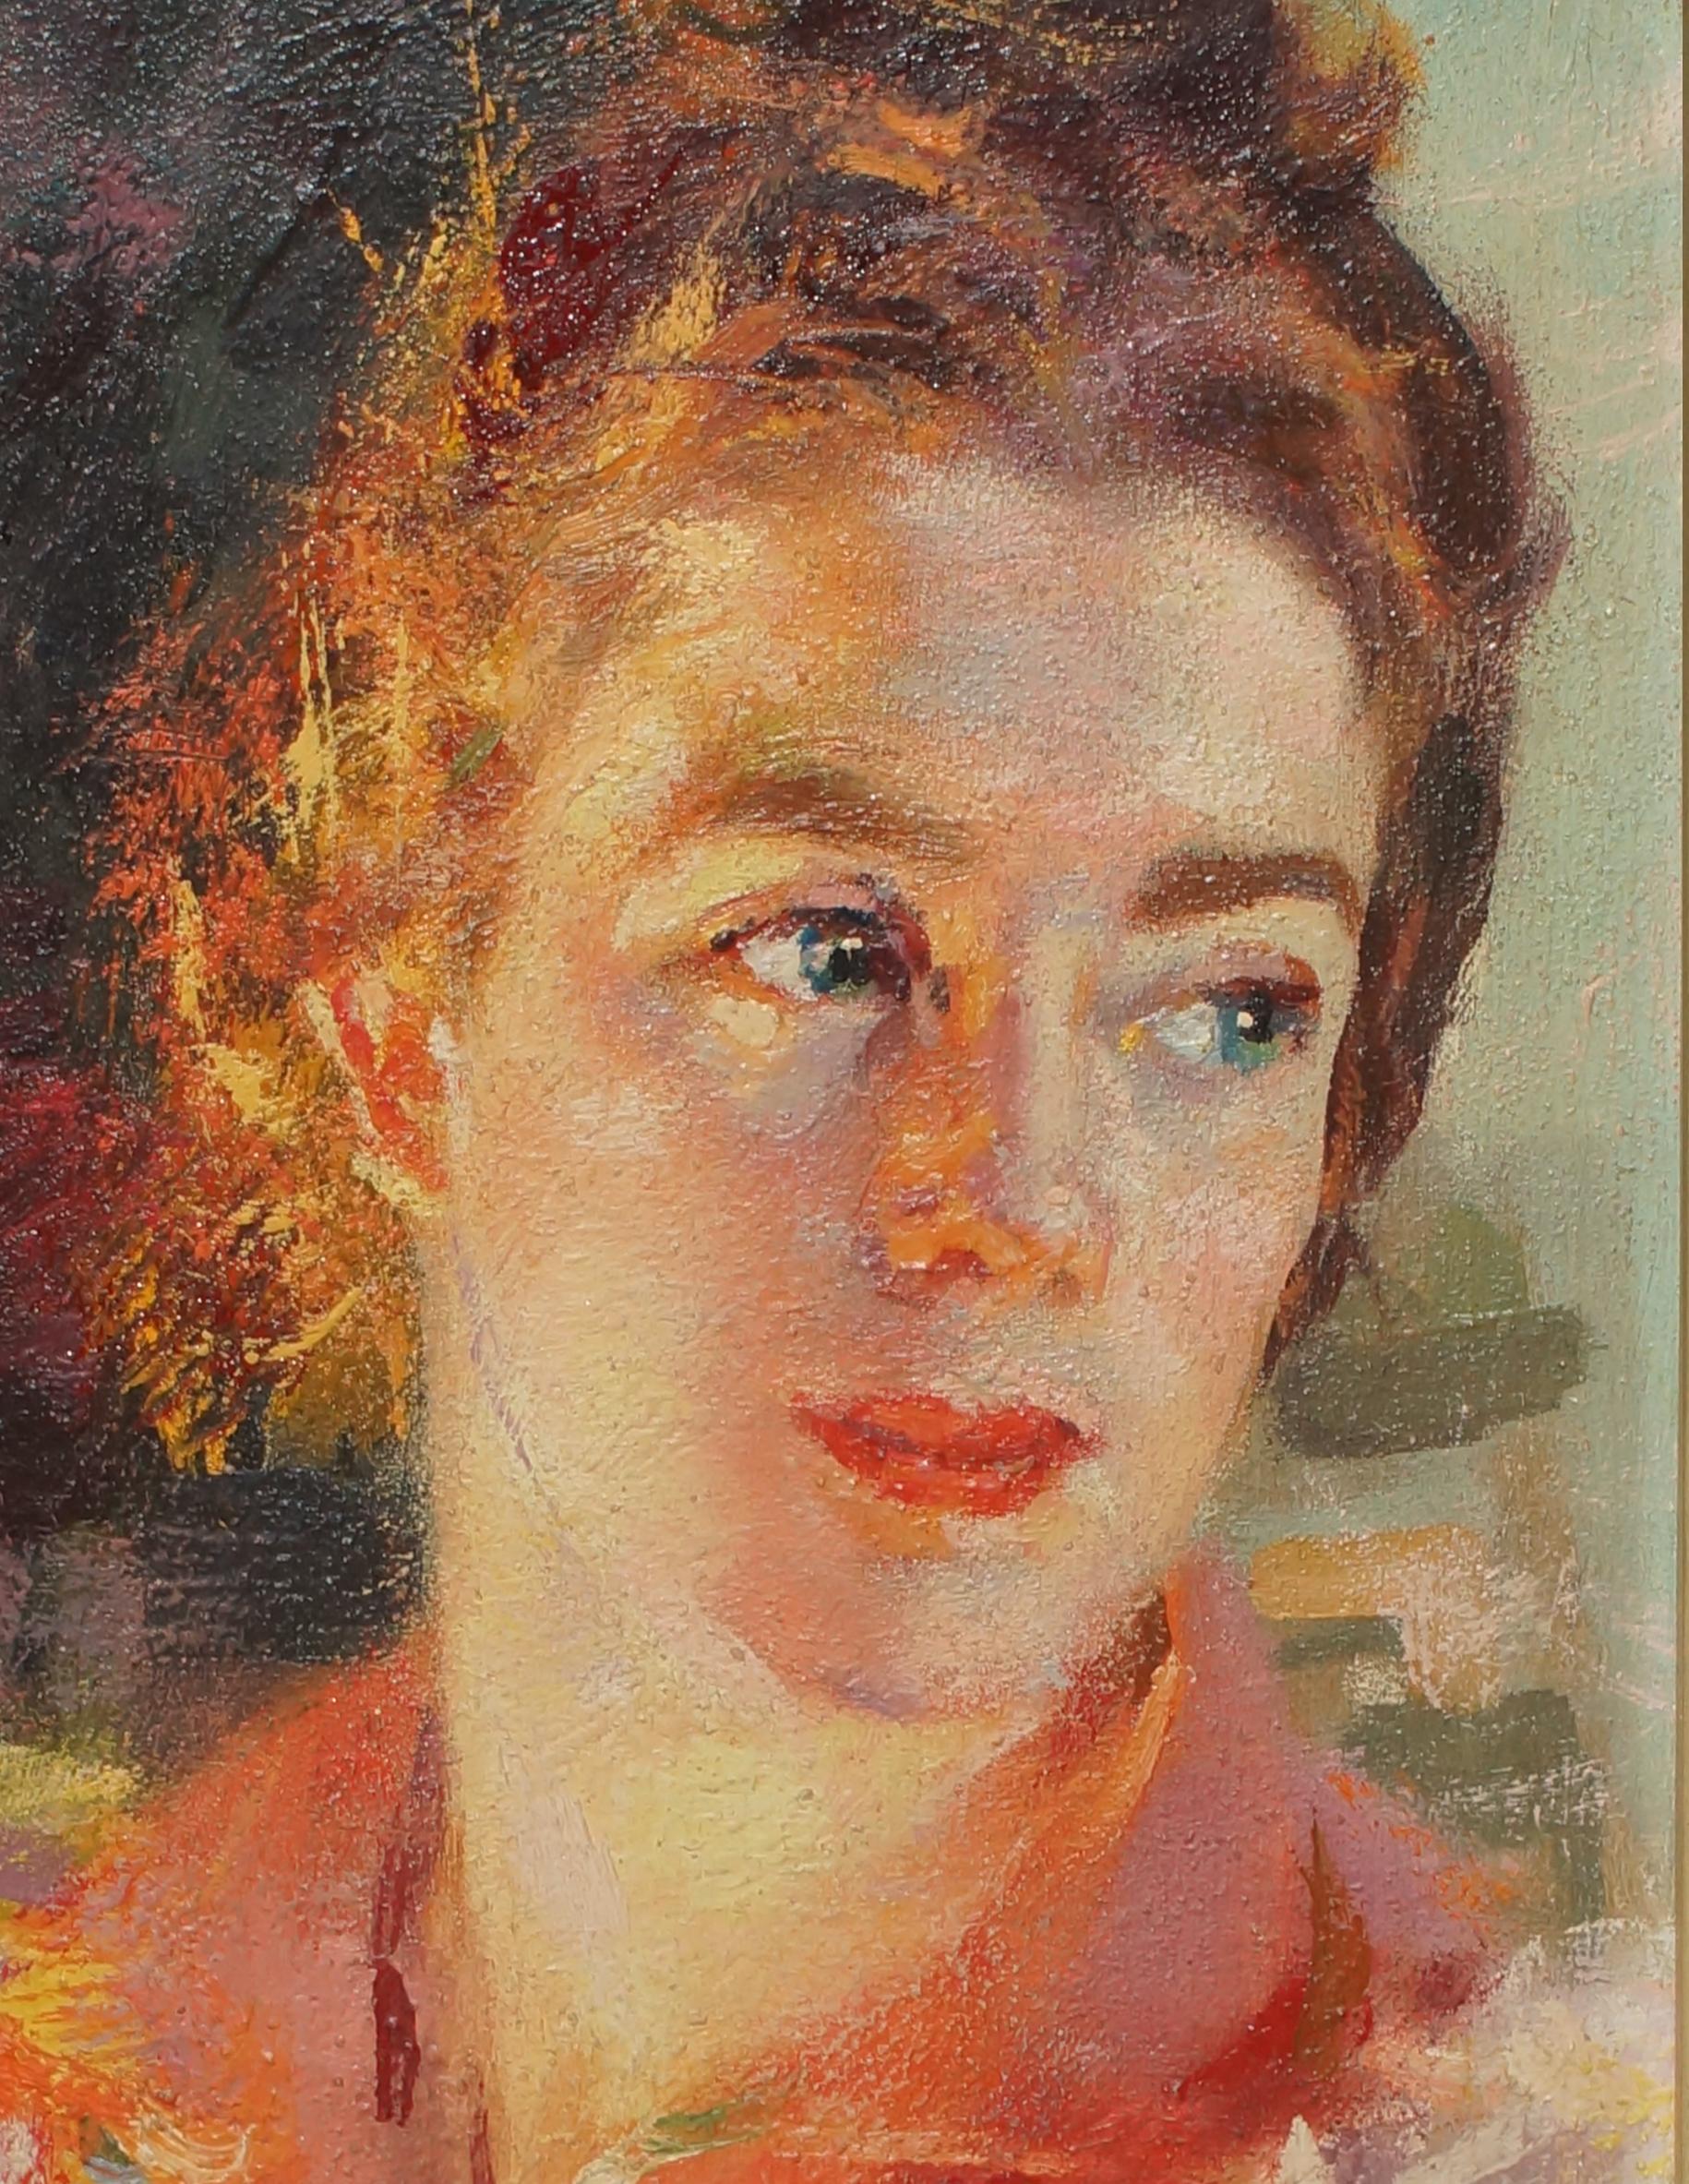 Contrast of Lights - Portrait of Elica Balla - Oil on Panel by G. Balla - 1941 - Painting by Giacomo Balla